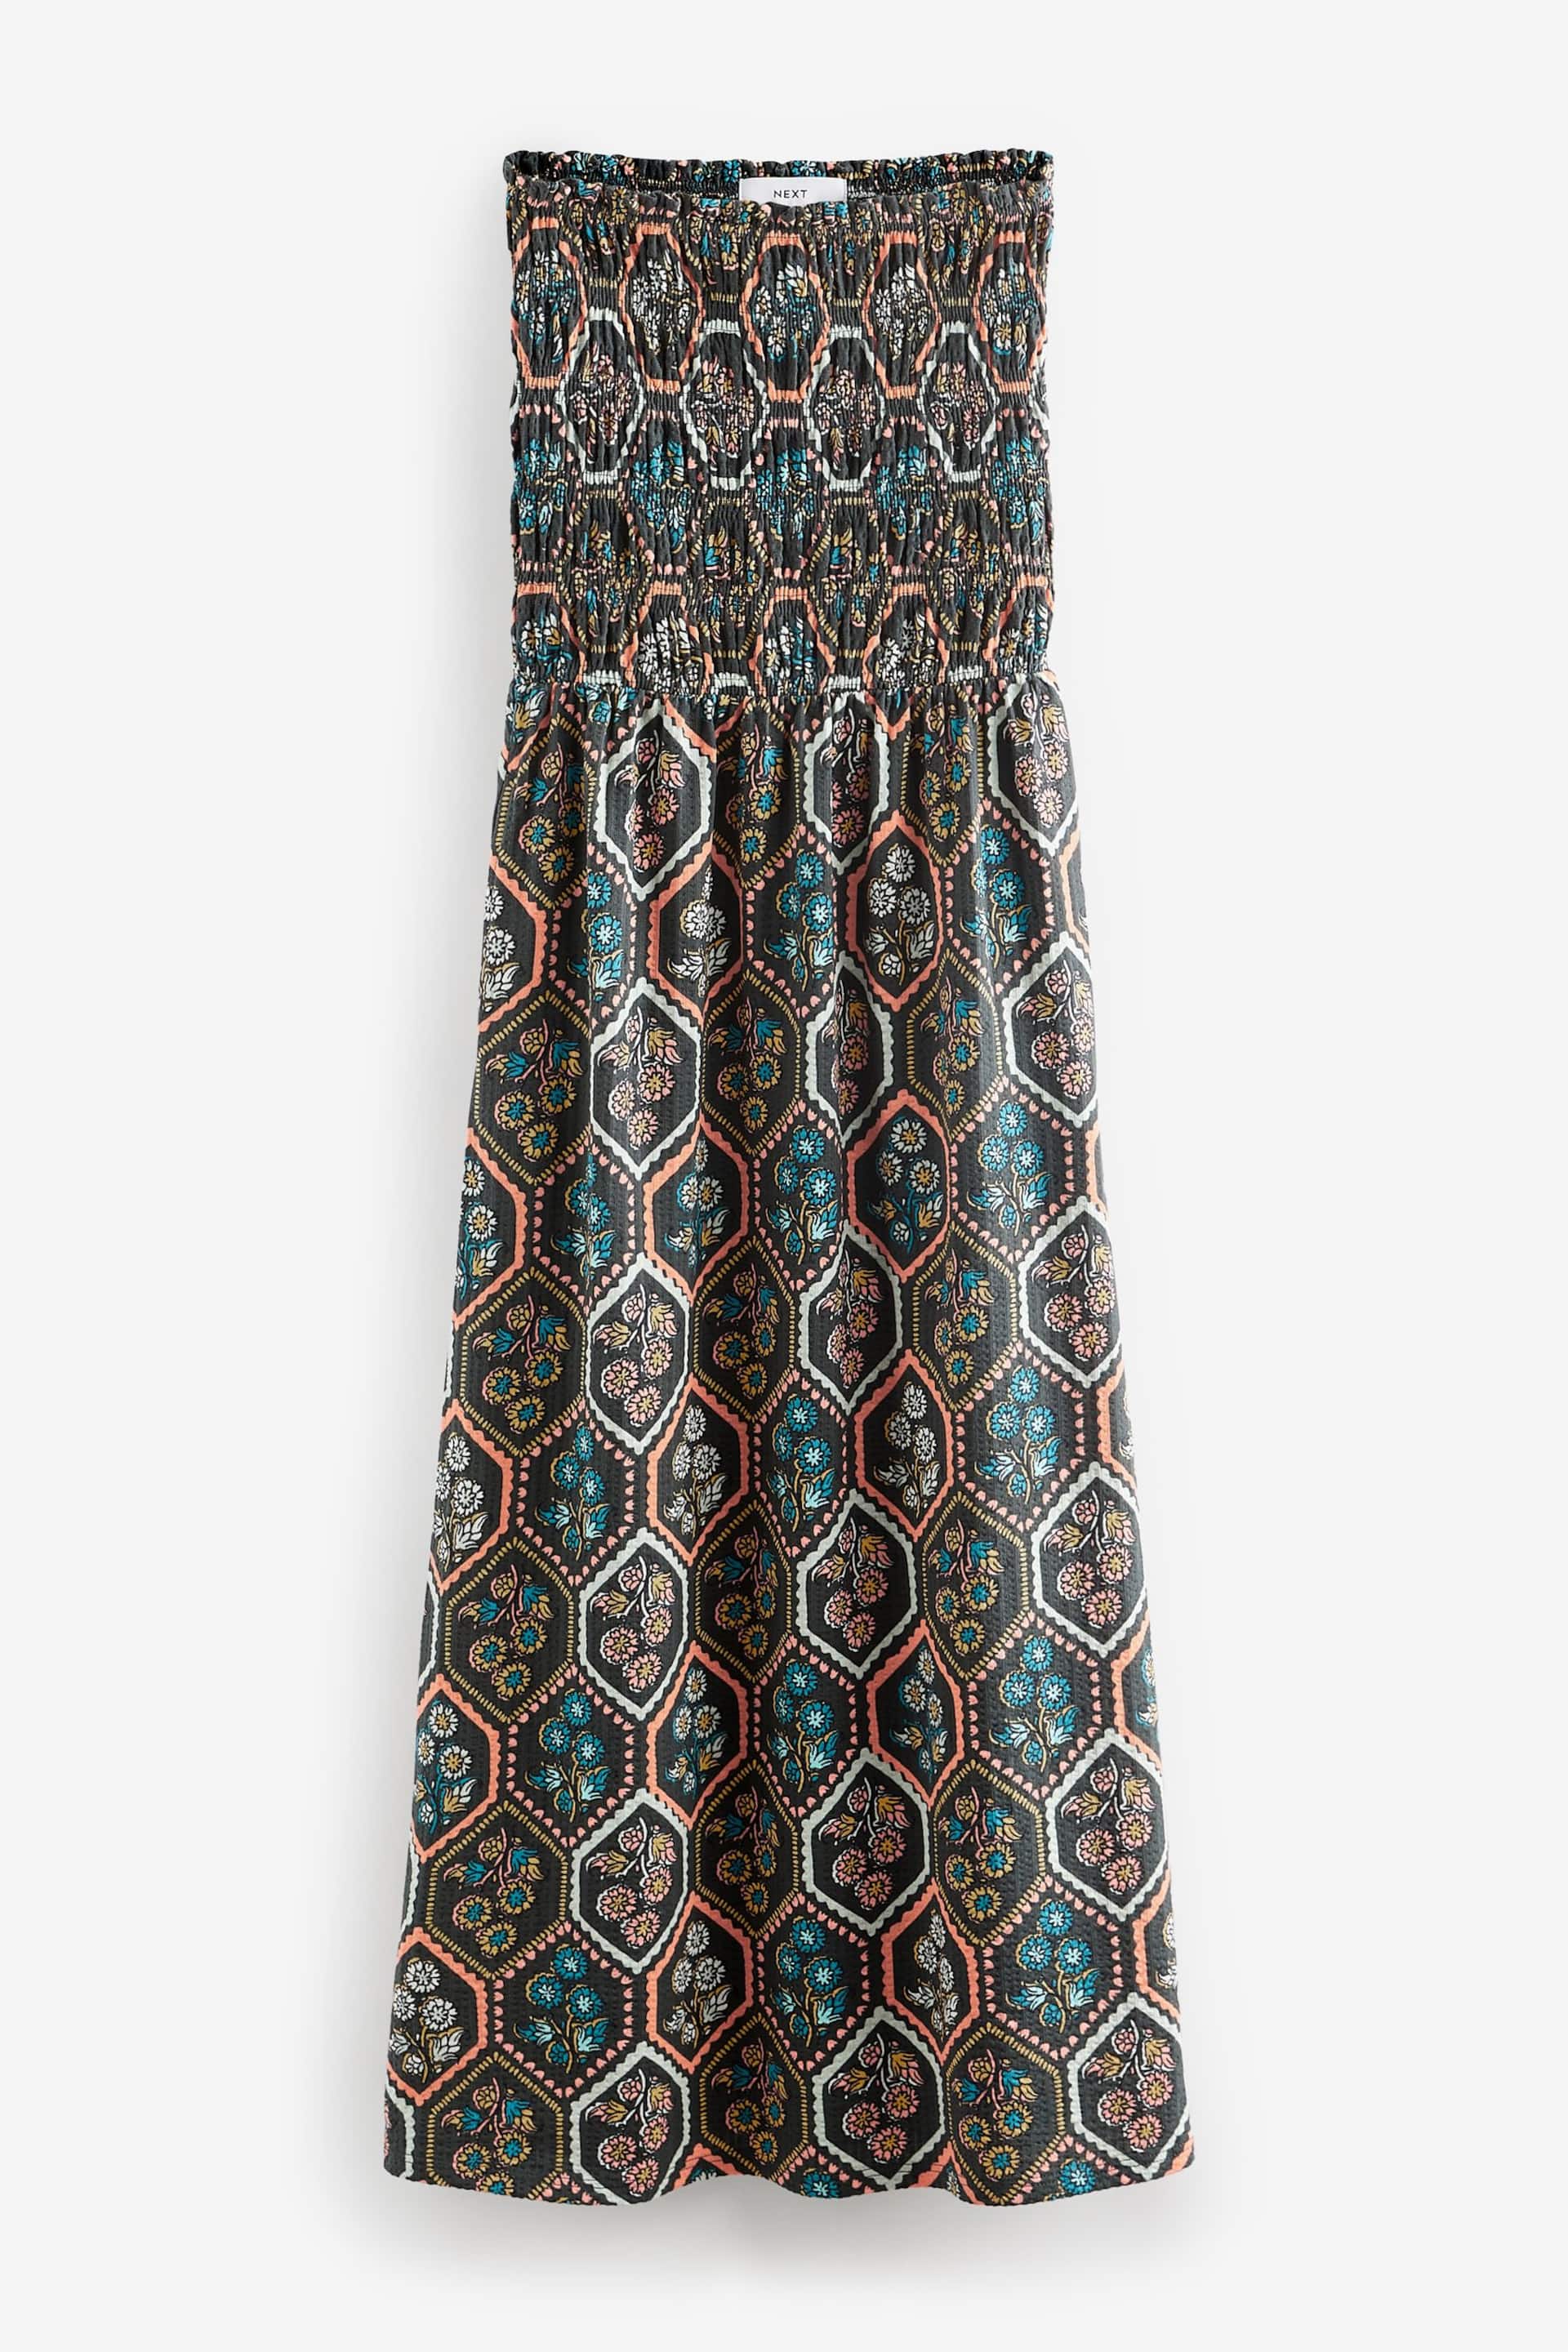 Teal Blue Jersey Cotton Textured Bandeau Midi Dress - Image 6 of 7